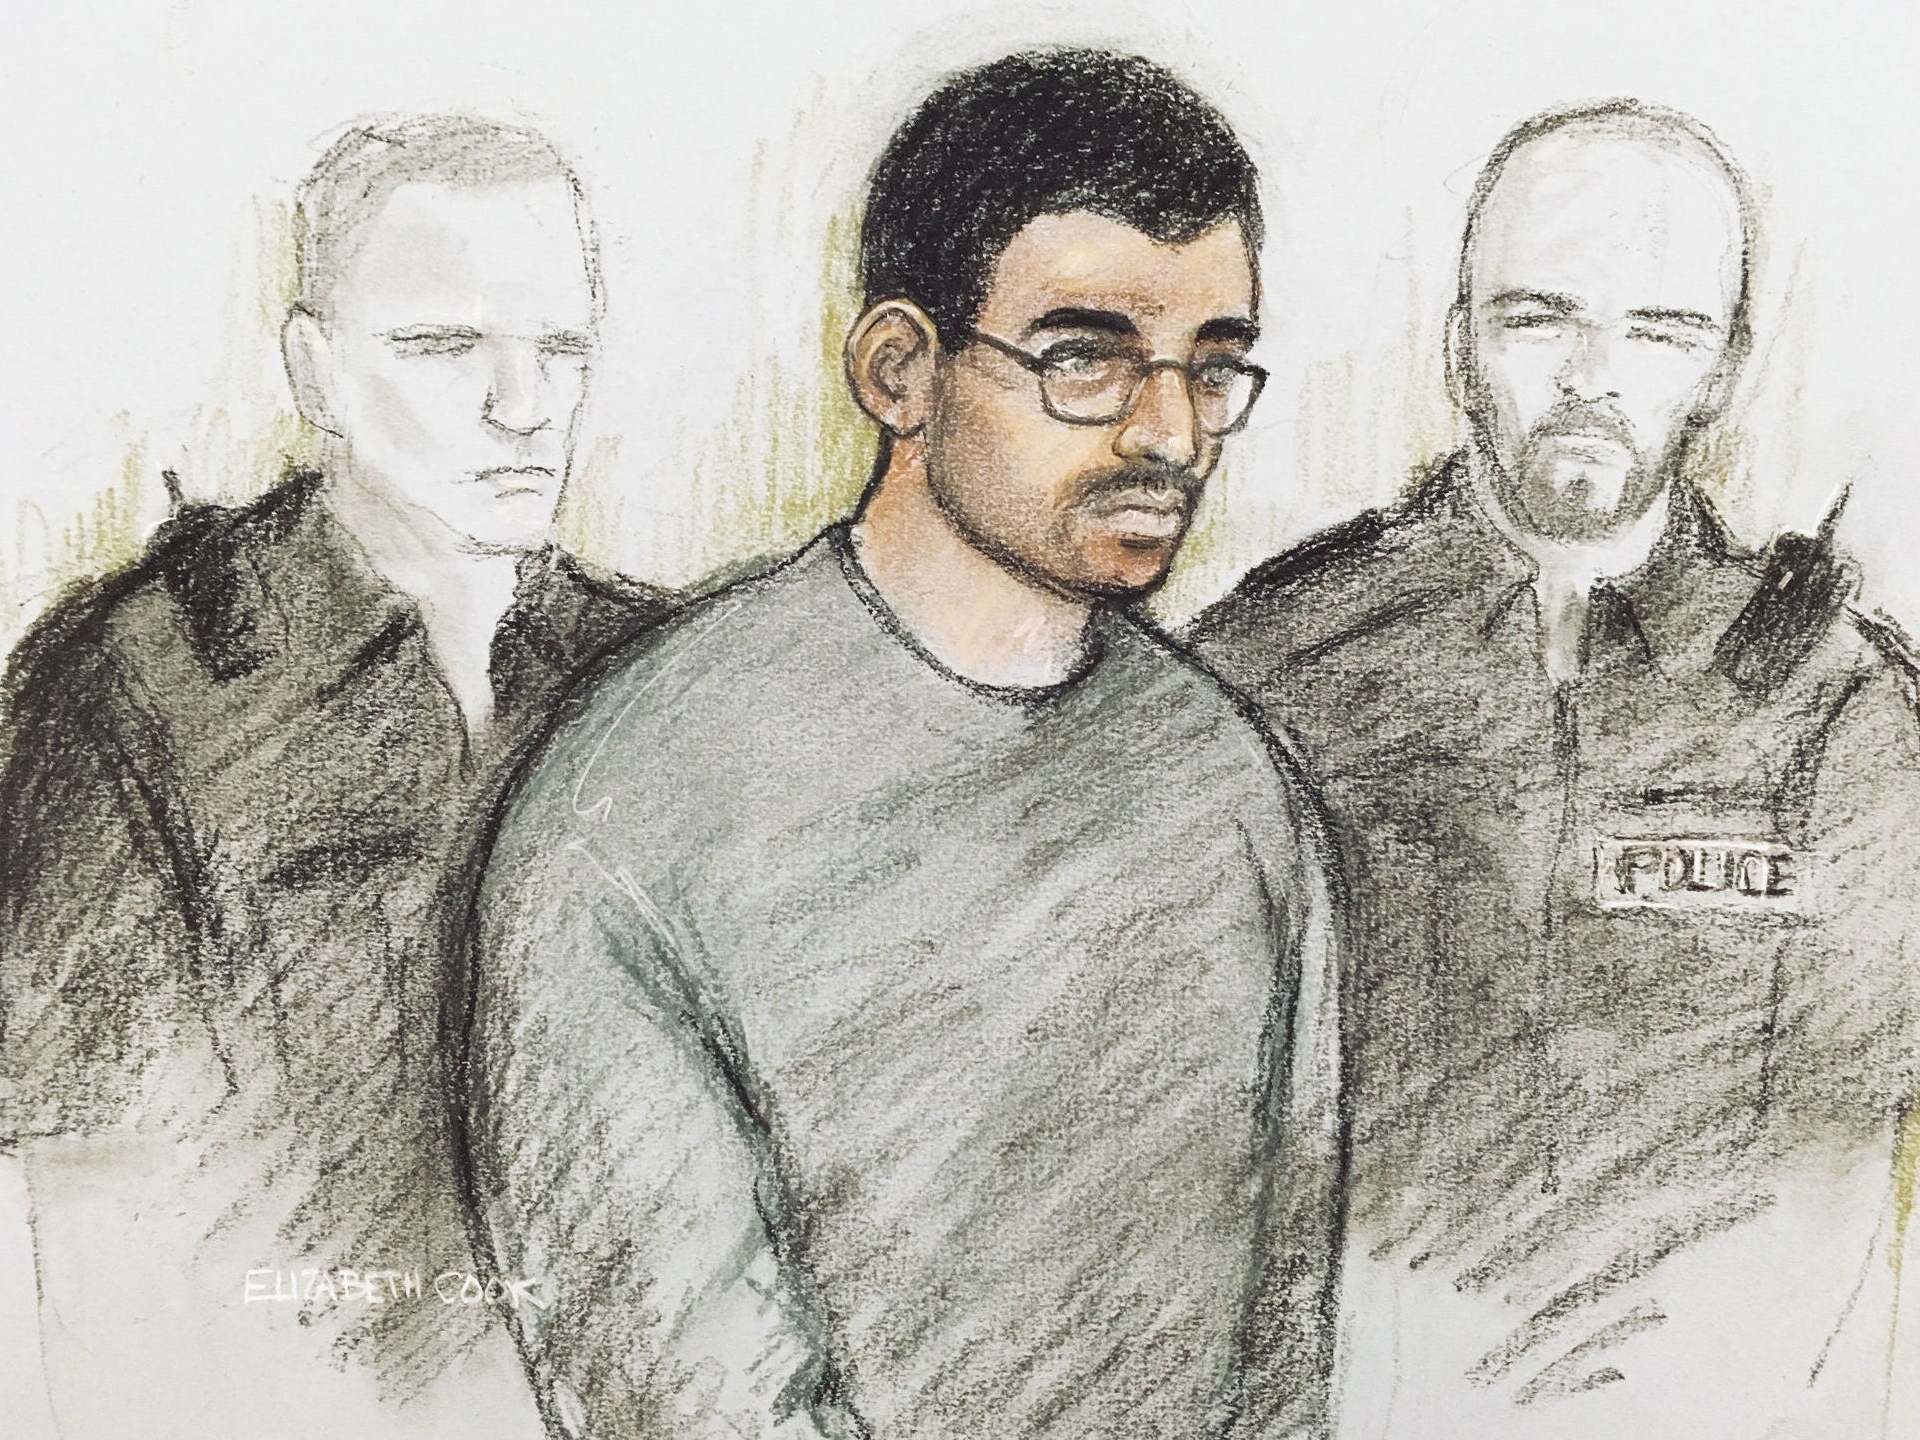 Hashem Abedi denies all charges